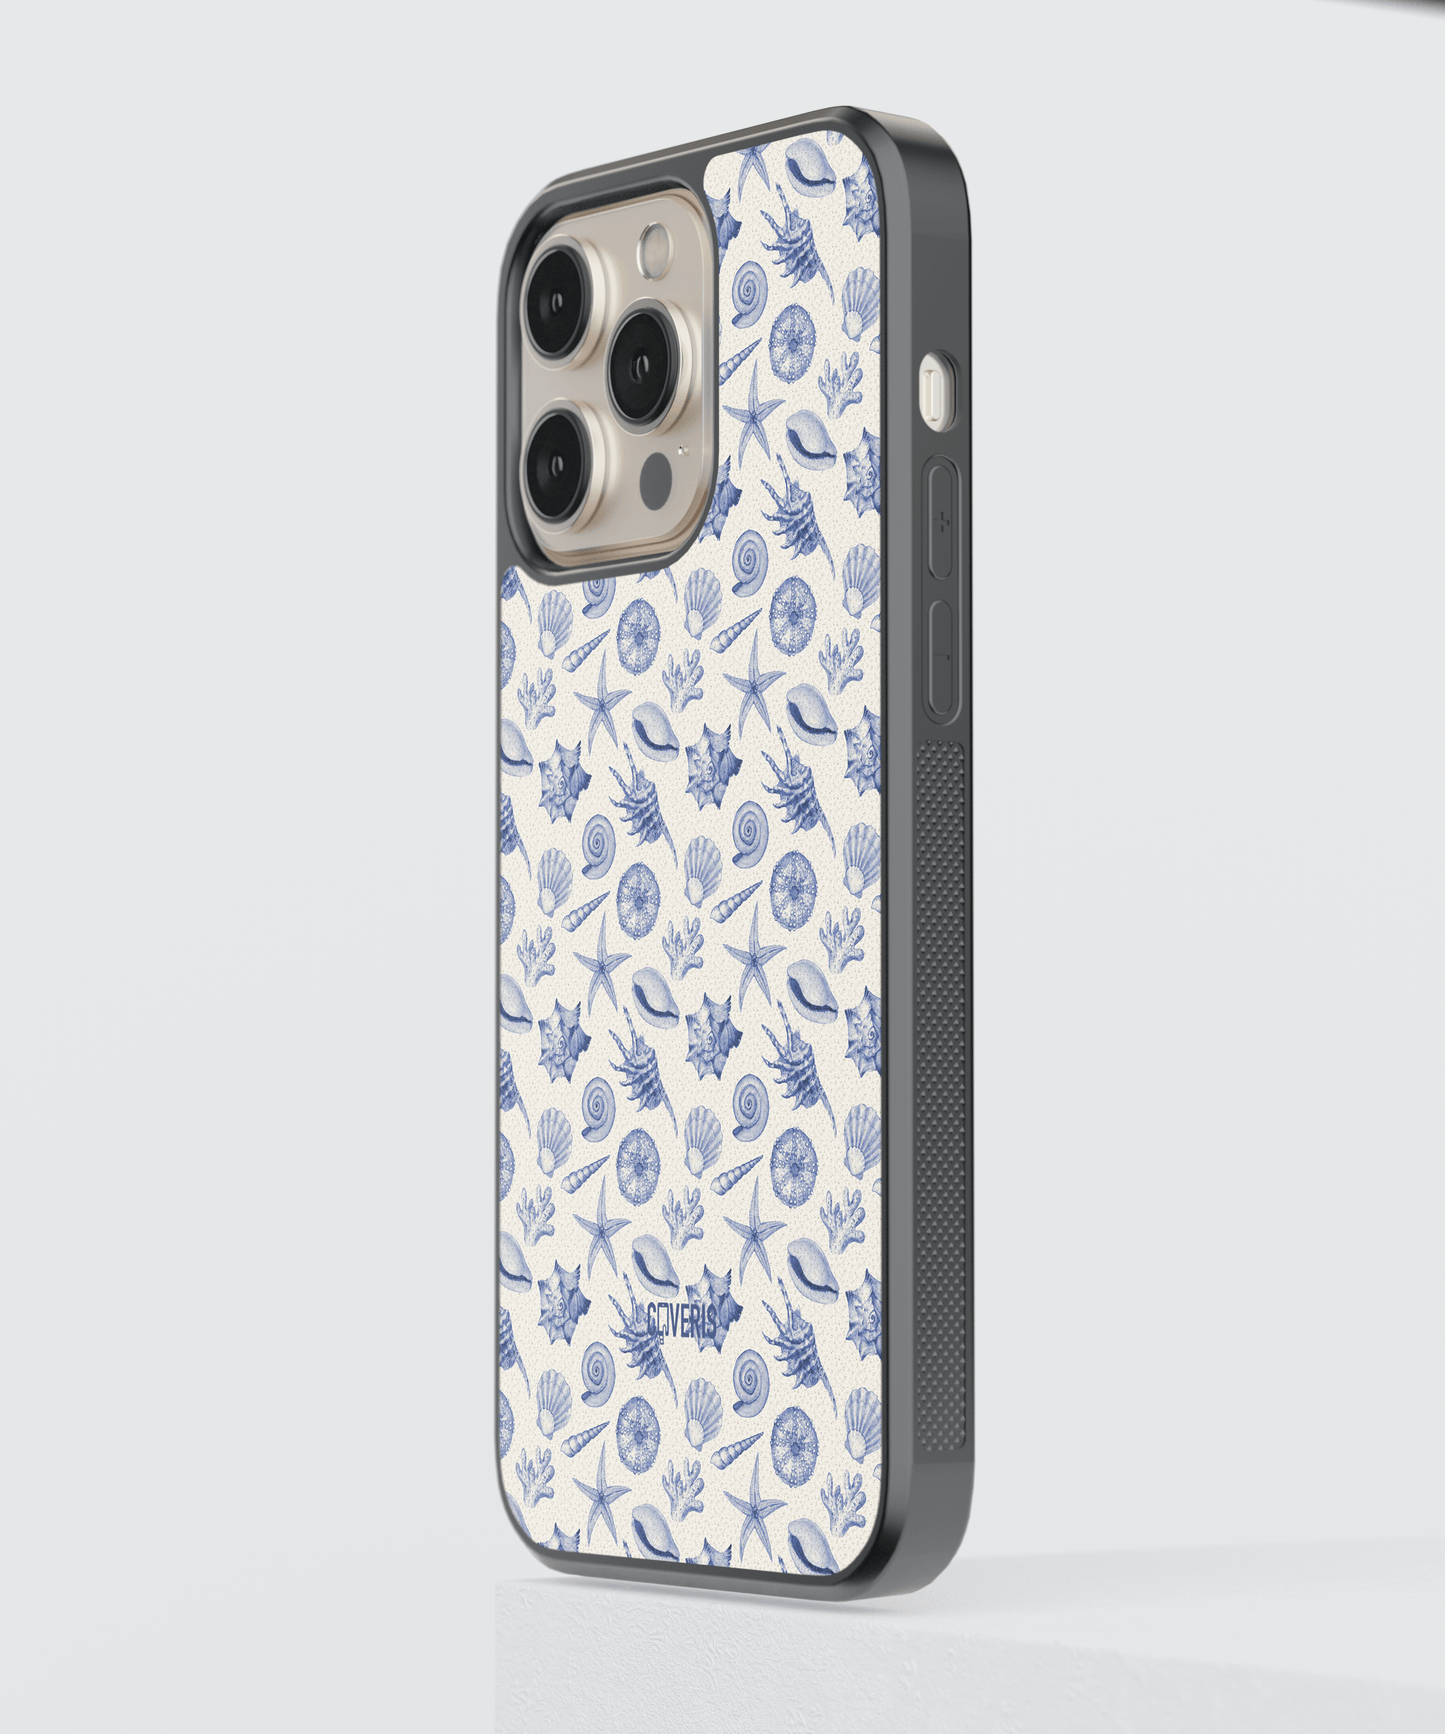 Shelluxe - iPhone 11 pro phone case